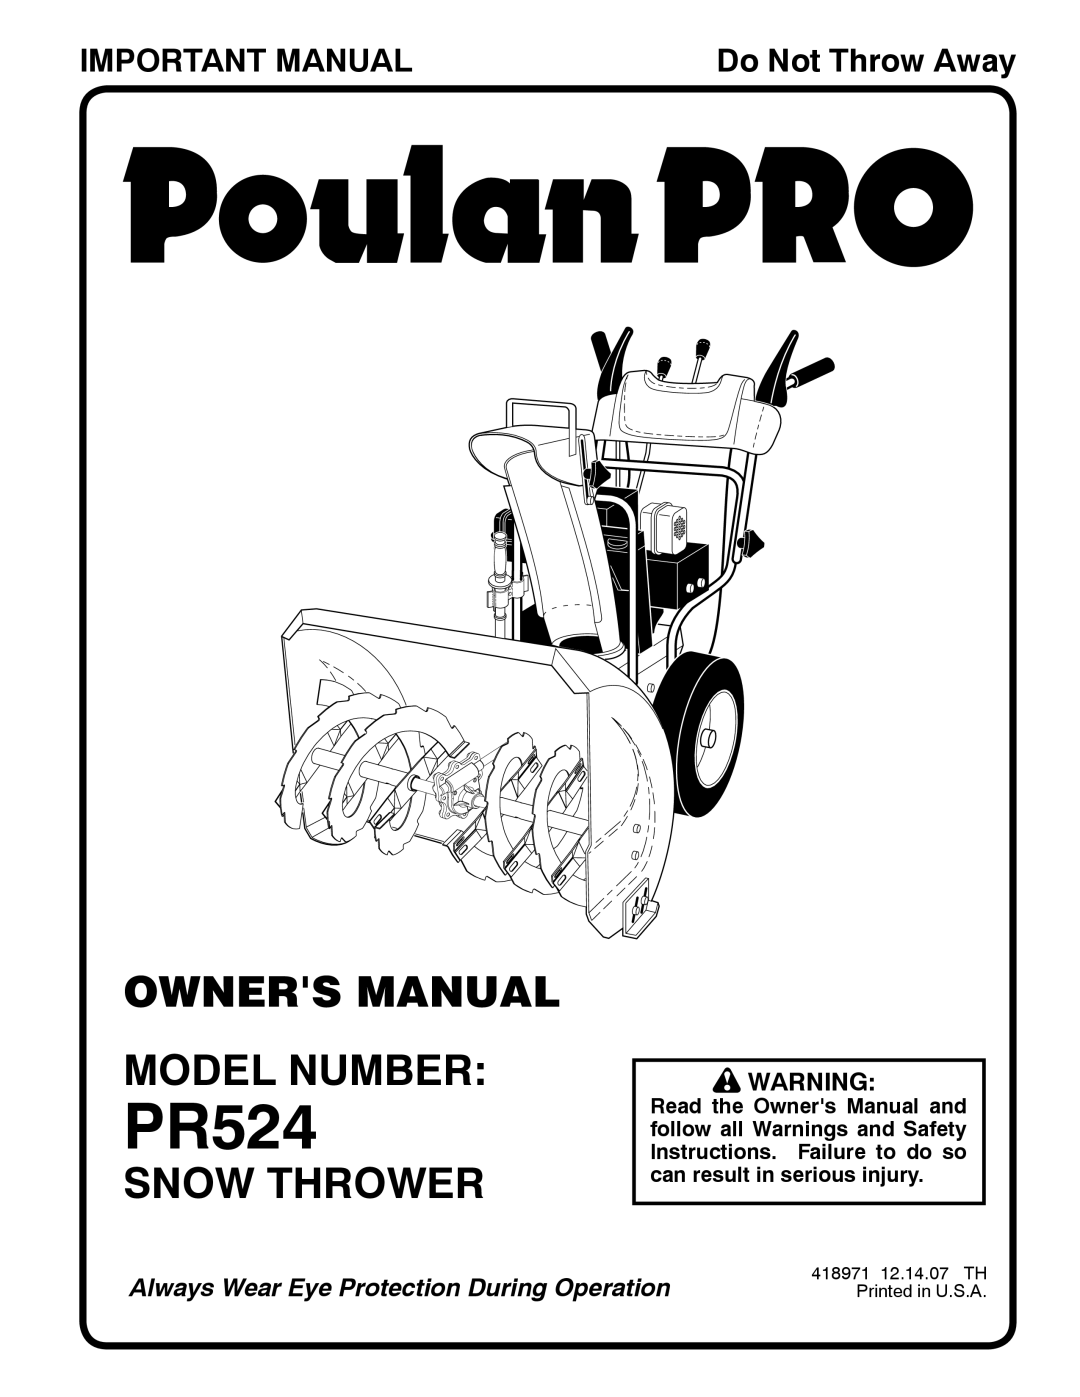 Poulan 418971 owner manual Owners Manual Model Number, Snow Thrower, Important Manual, PR524, Do Not Throw Away 